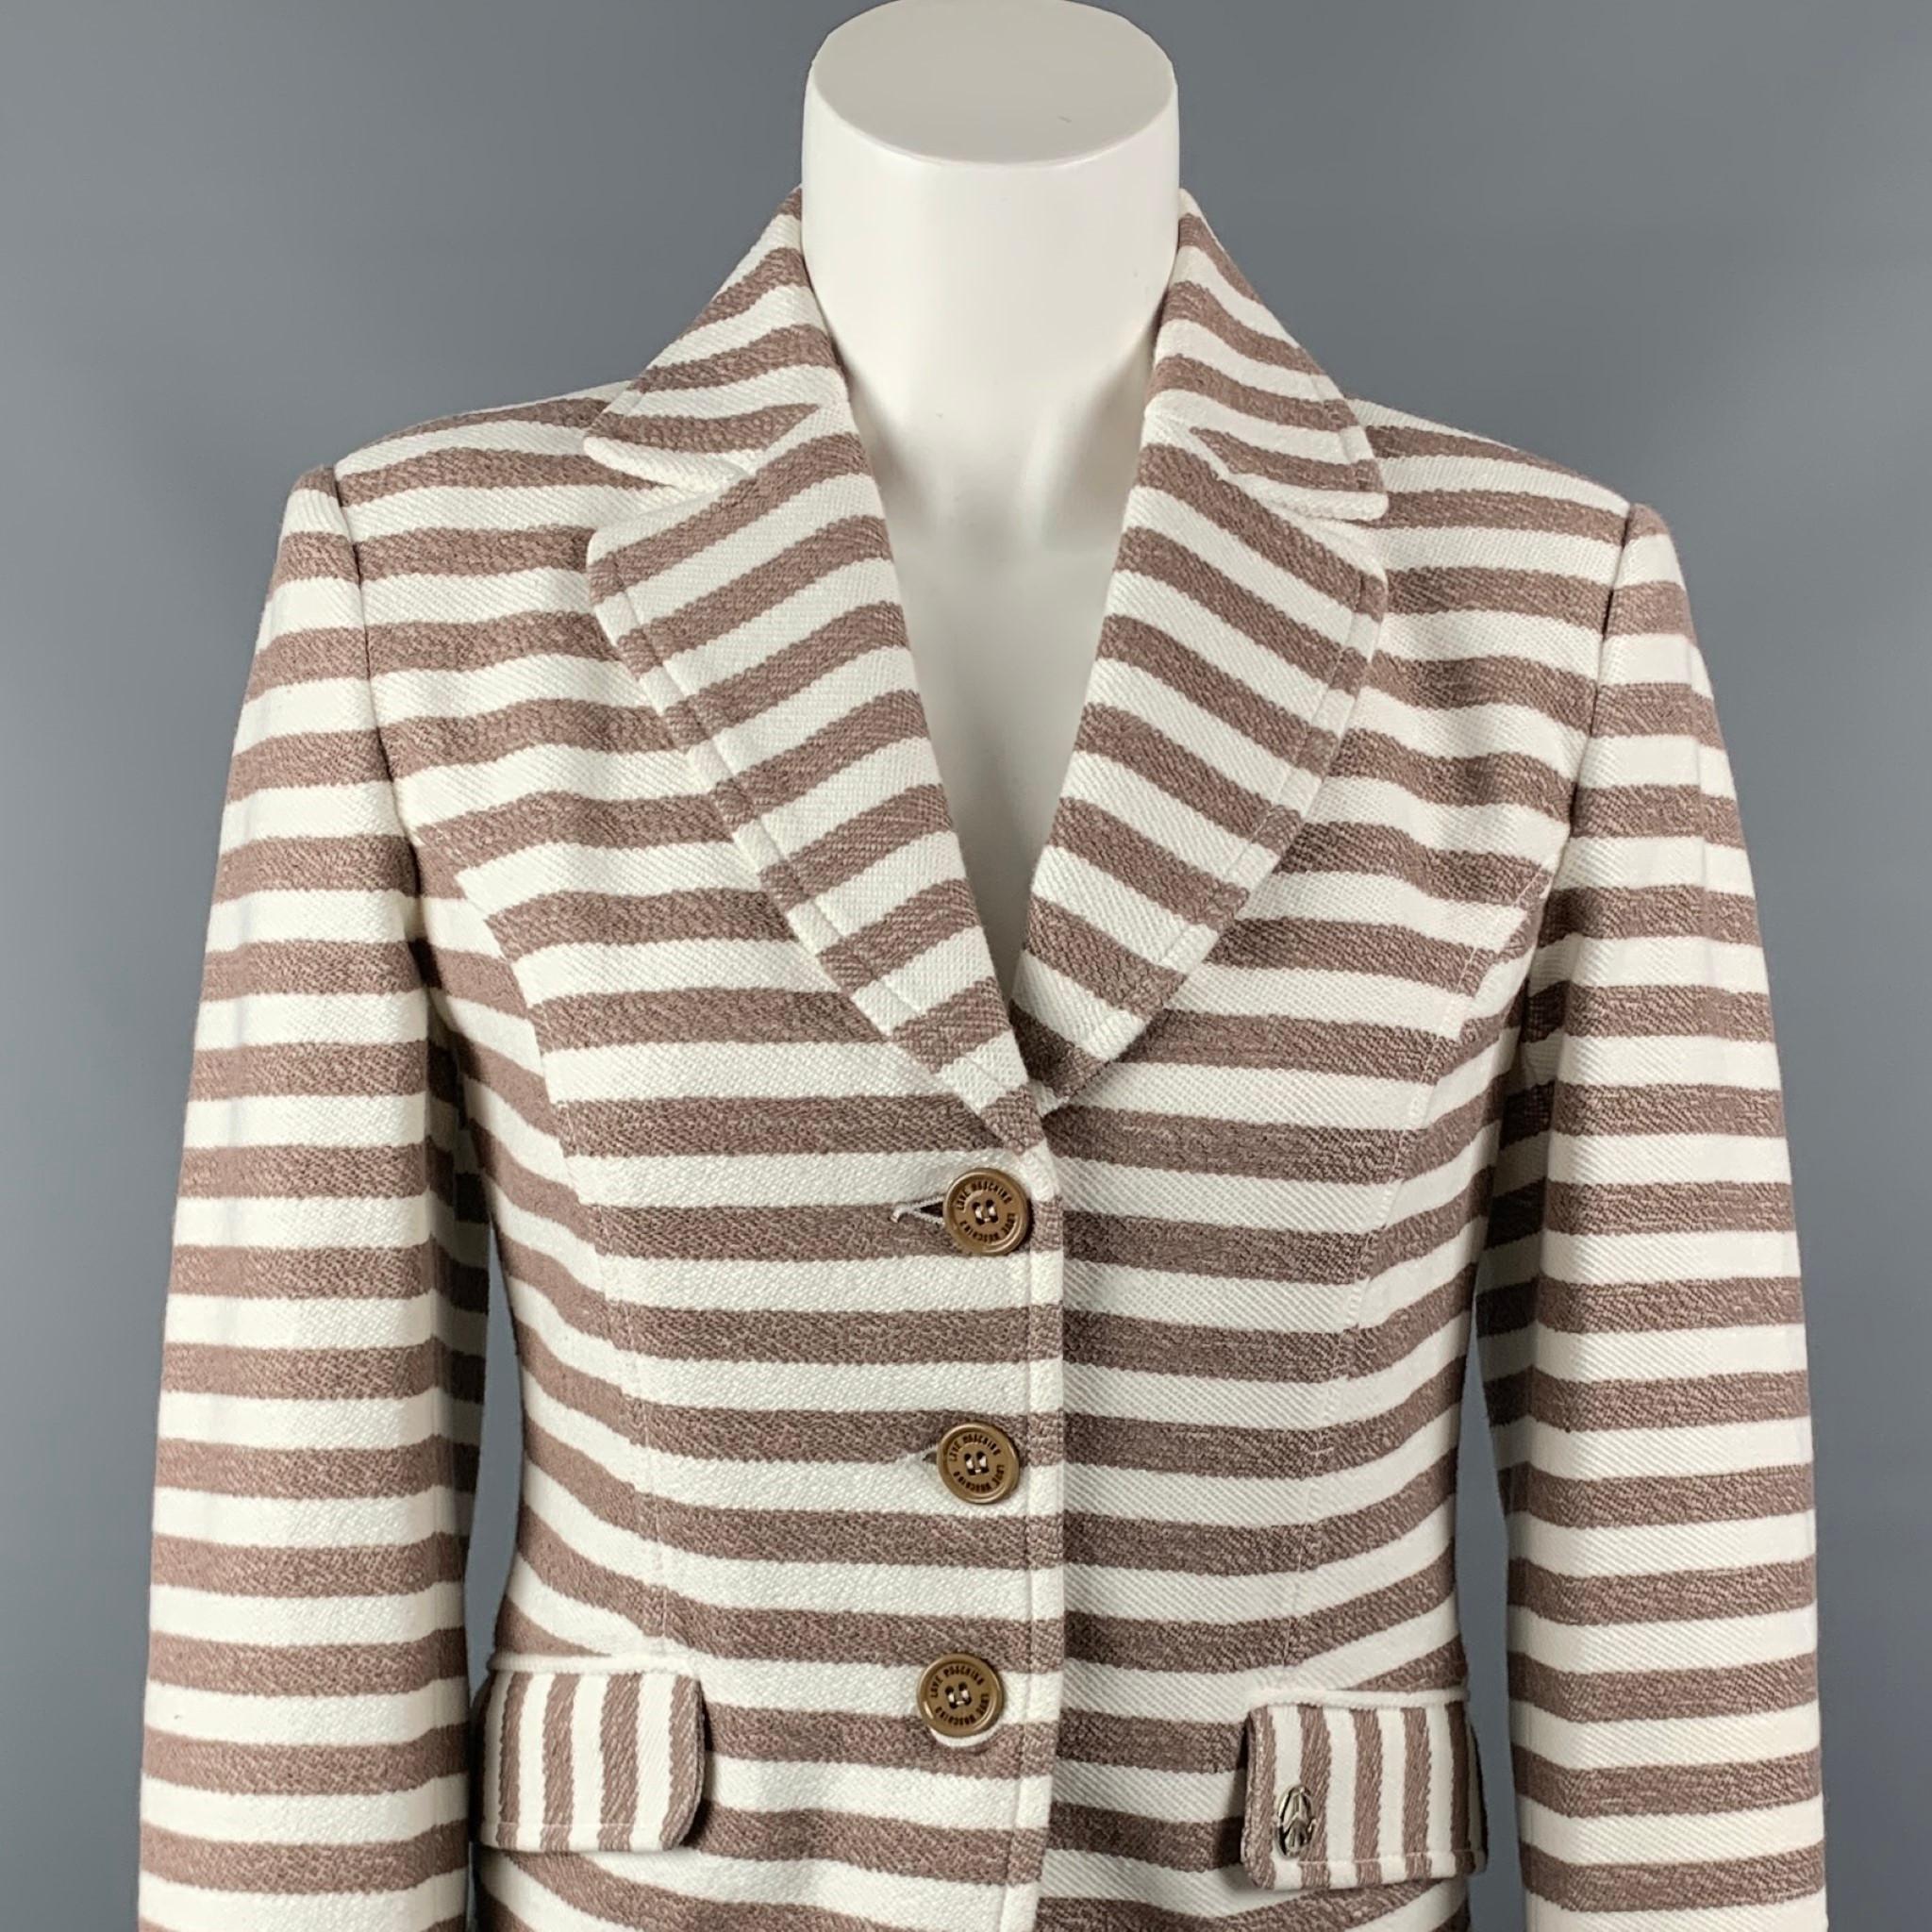 LOVE MOSCHINO jacket comes in a cream & taupe stripe cotton with a full liner featuring a notch lapel, flap pockets, silver tone logo, and a three button closure.

New With Tags.
Marked: D 36 / GB 8 / F 36 / USA 4 / I 40   

Measurements:

Shoulder: